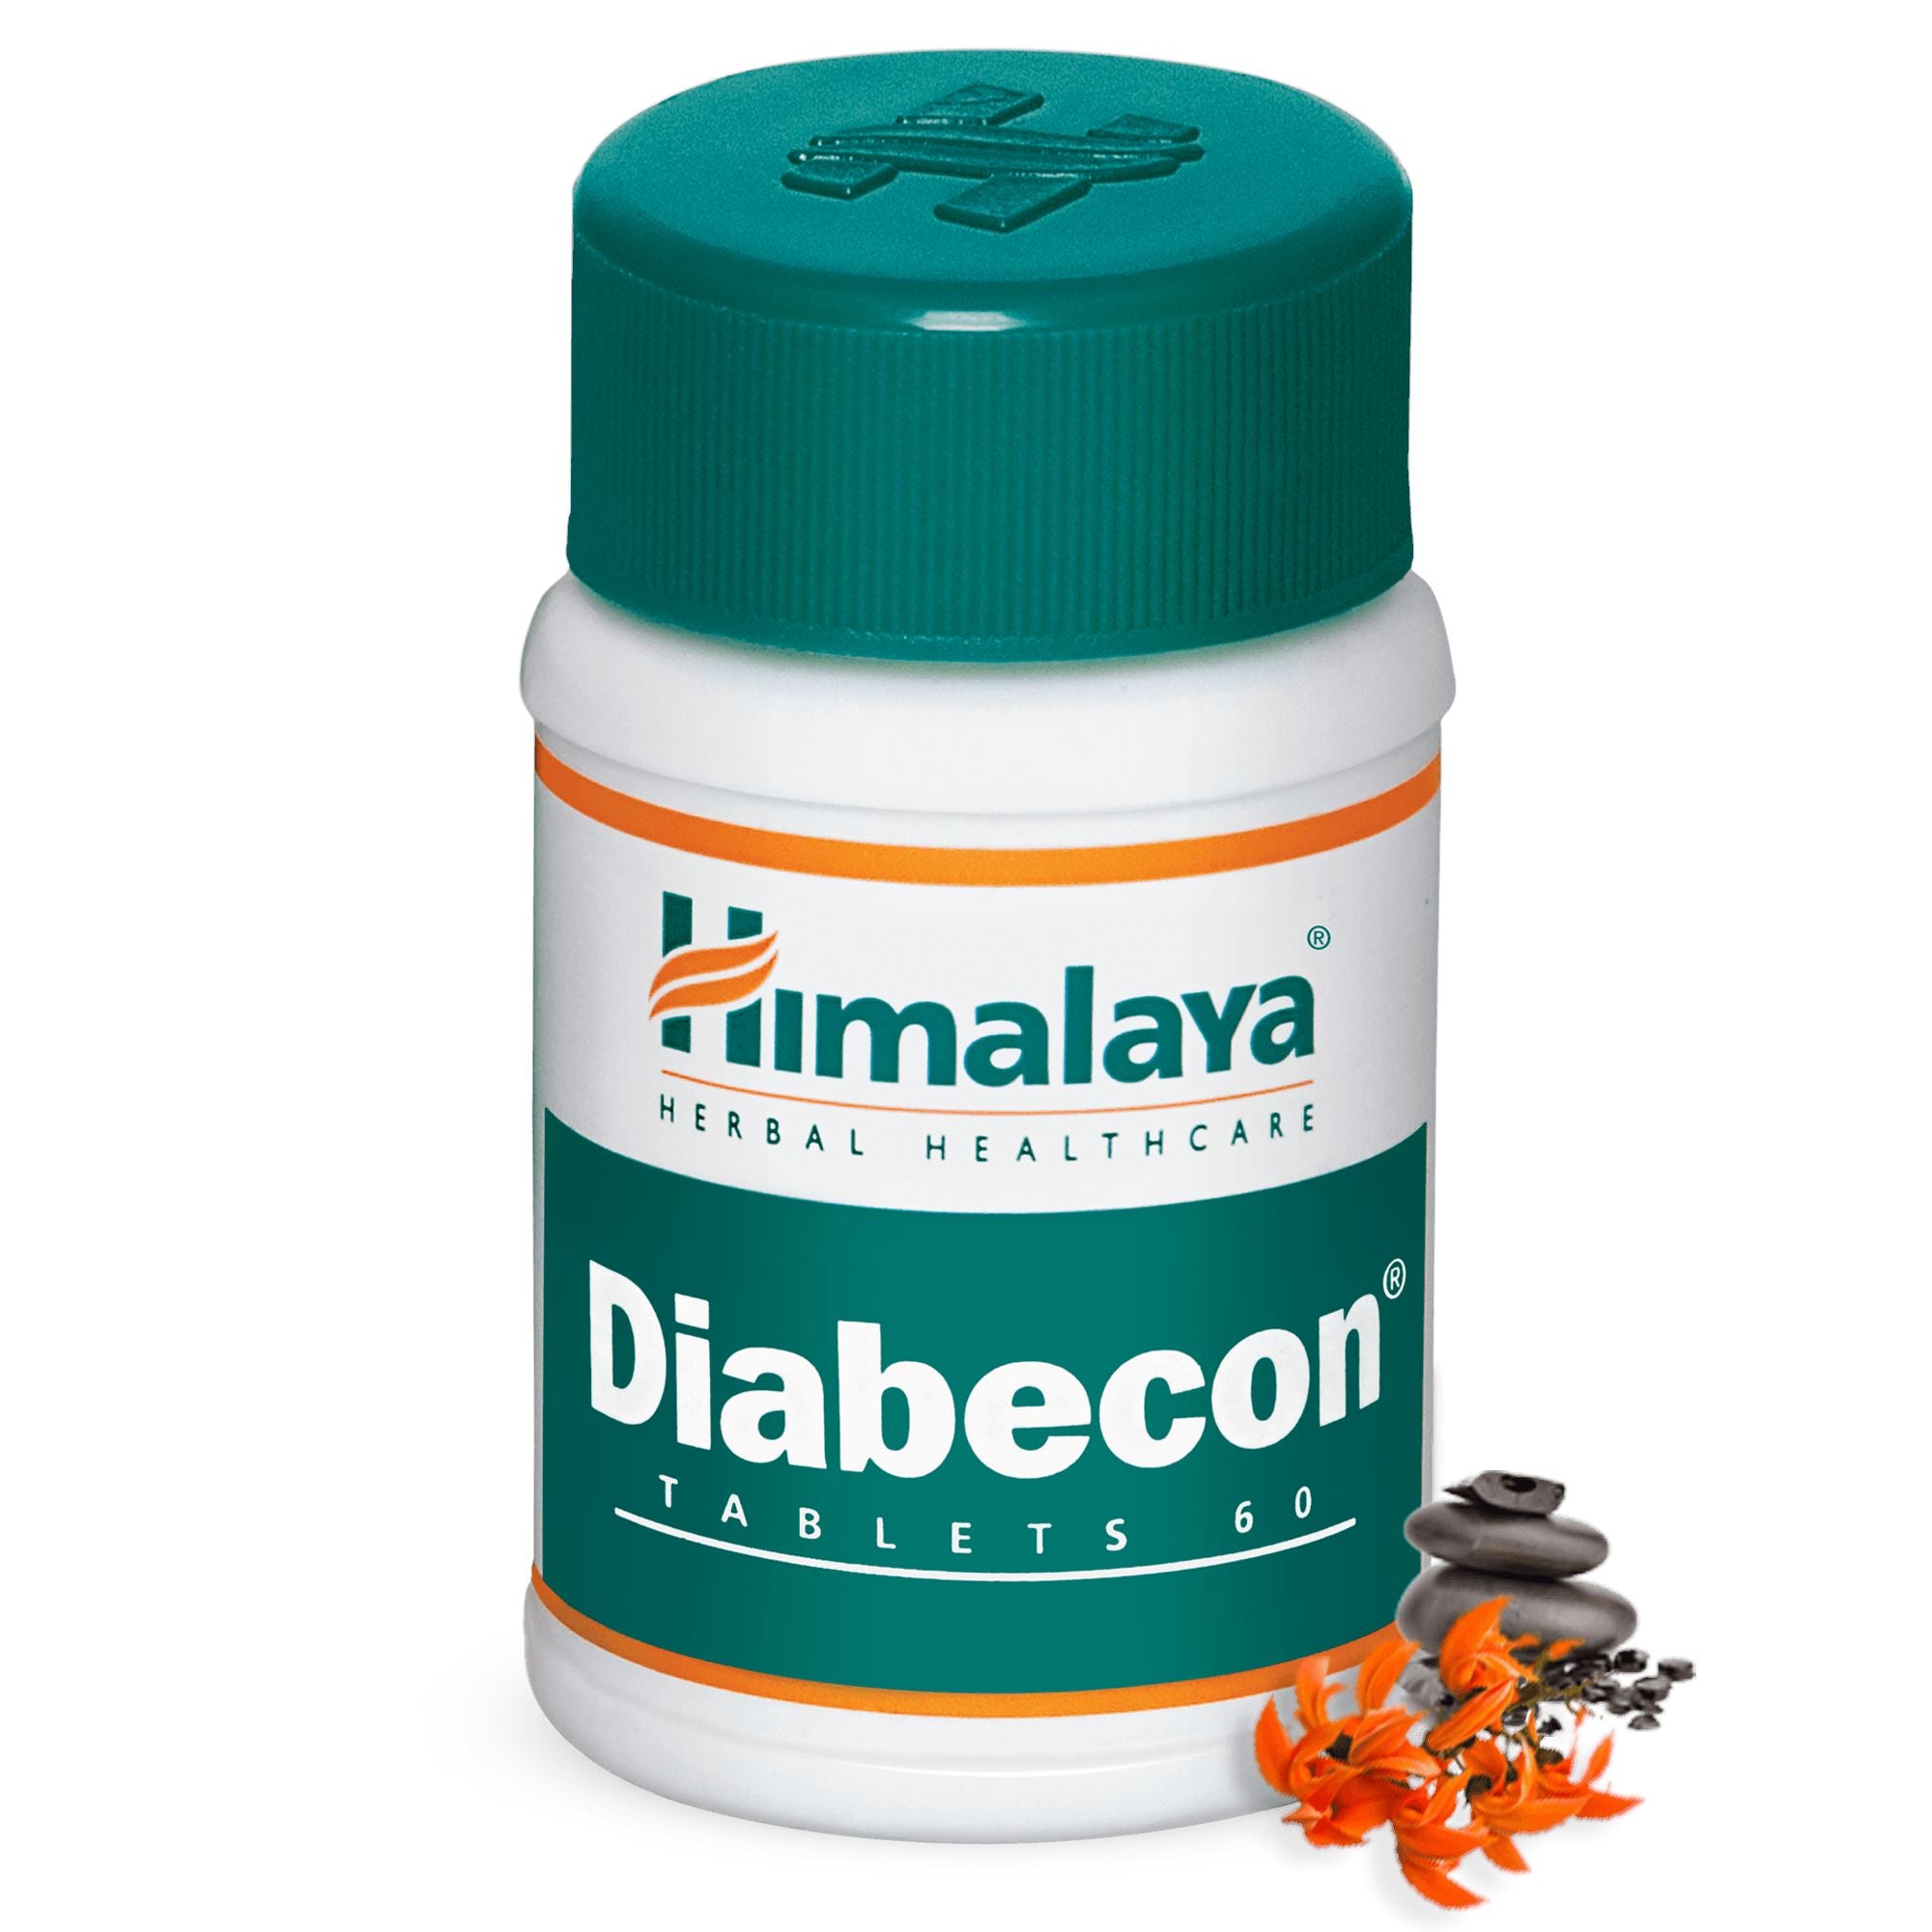 Himalaya Diabecon - Tablets to reducing excessive blood sugar levels